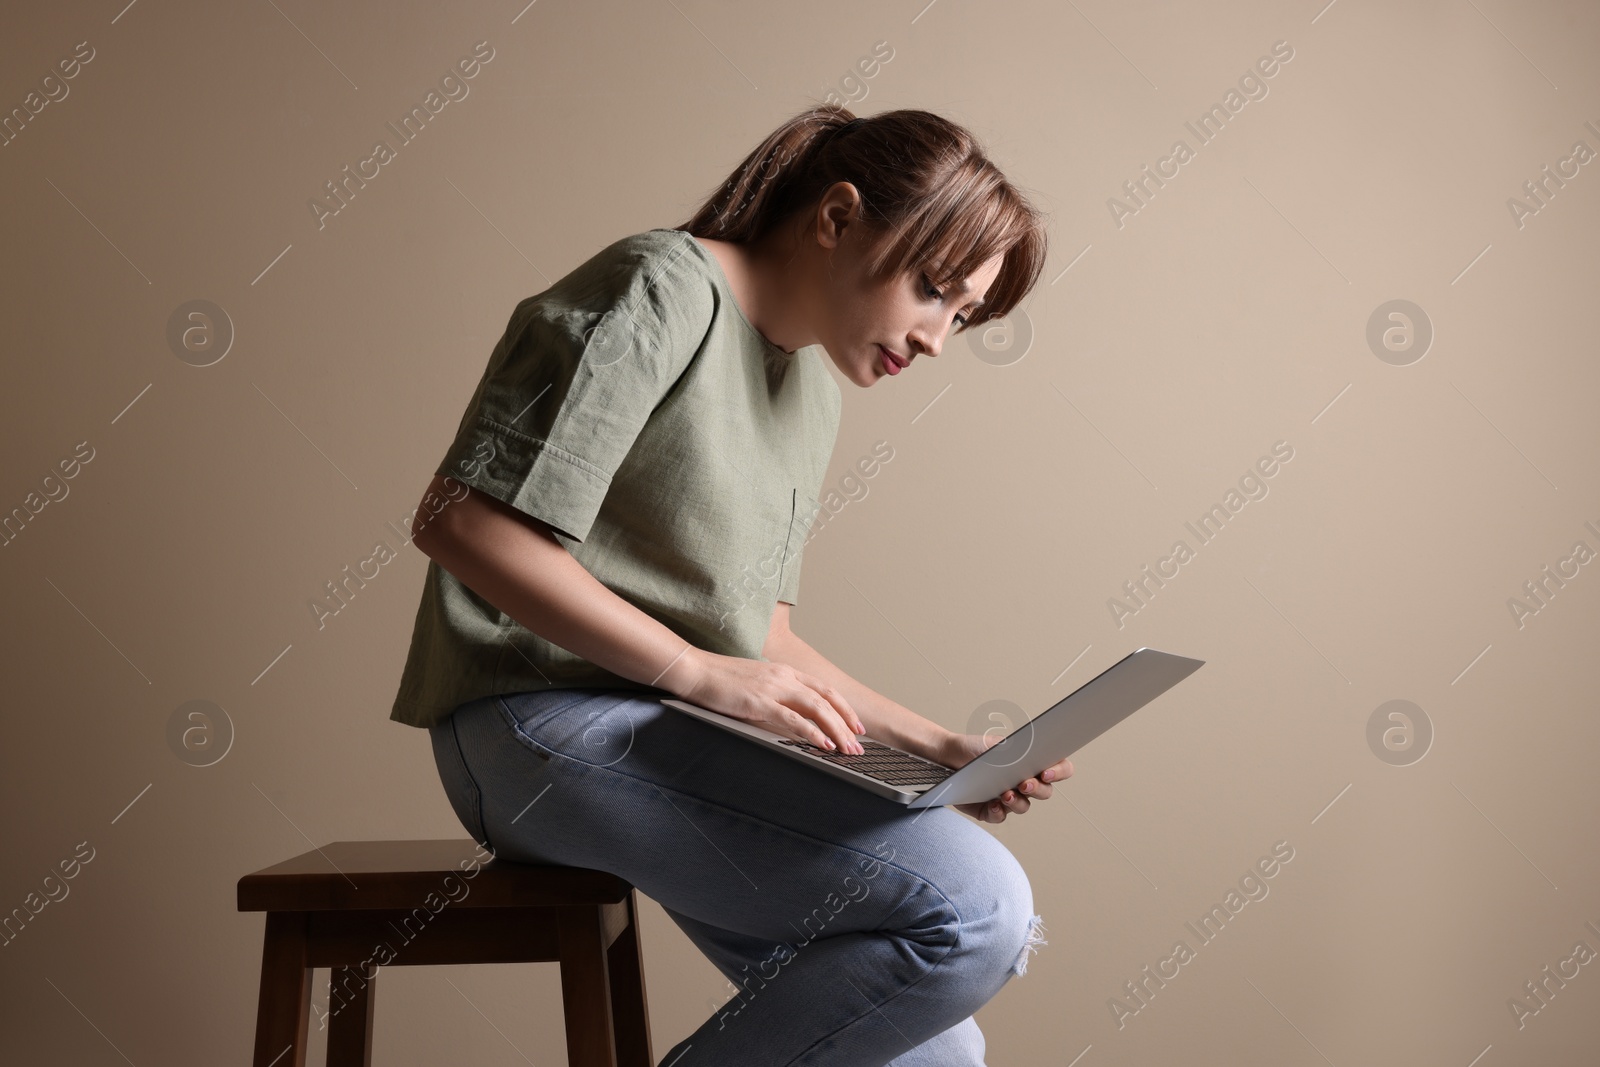 Photo of Young woman with poor posture using laptop while sitting on stool against beige background